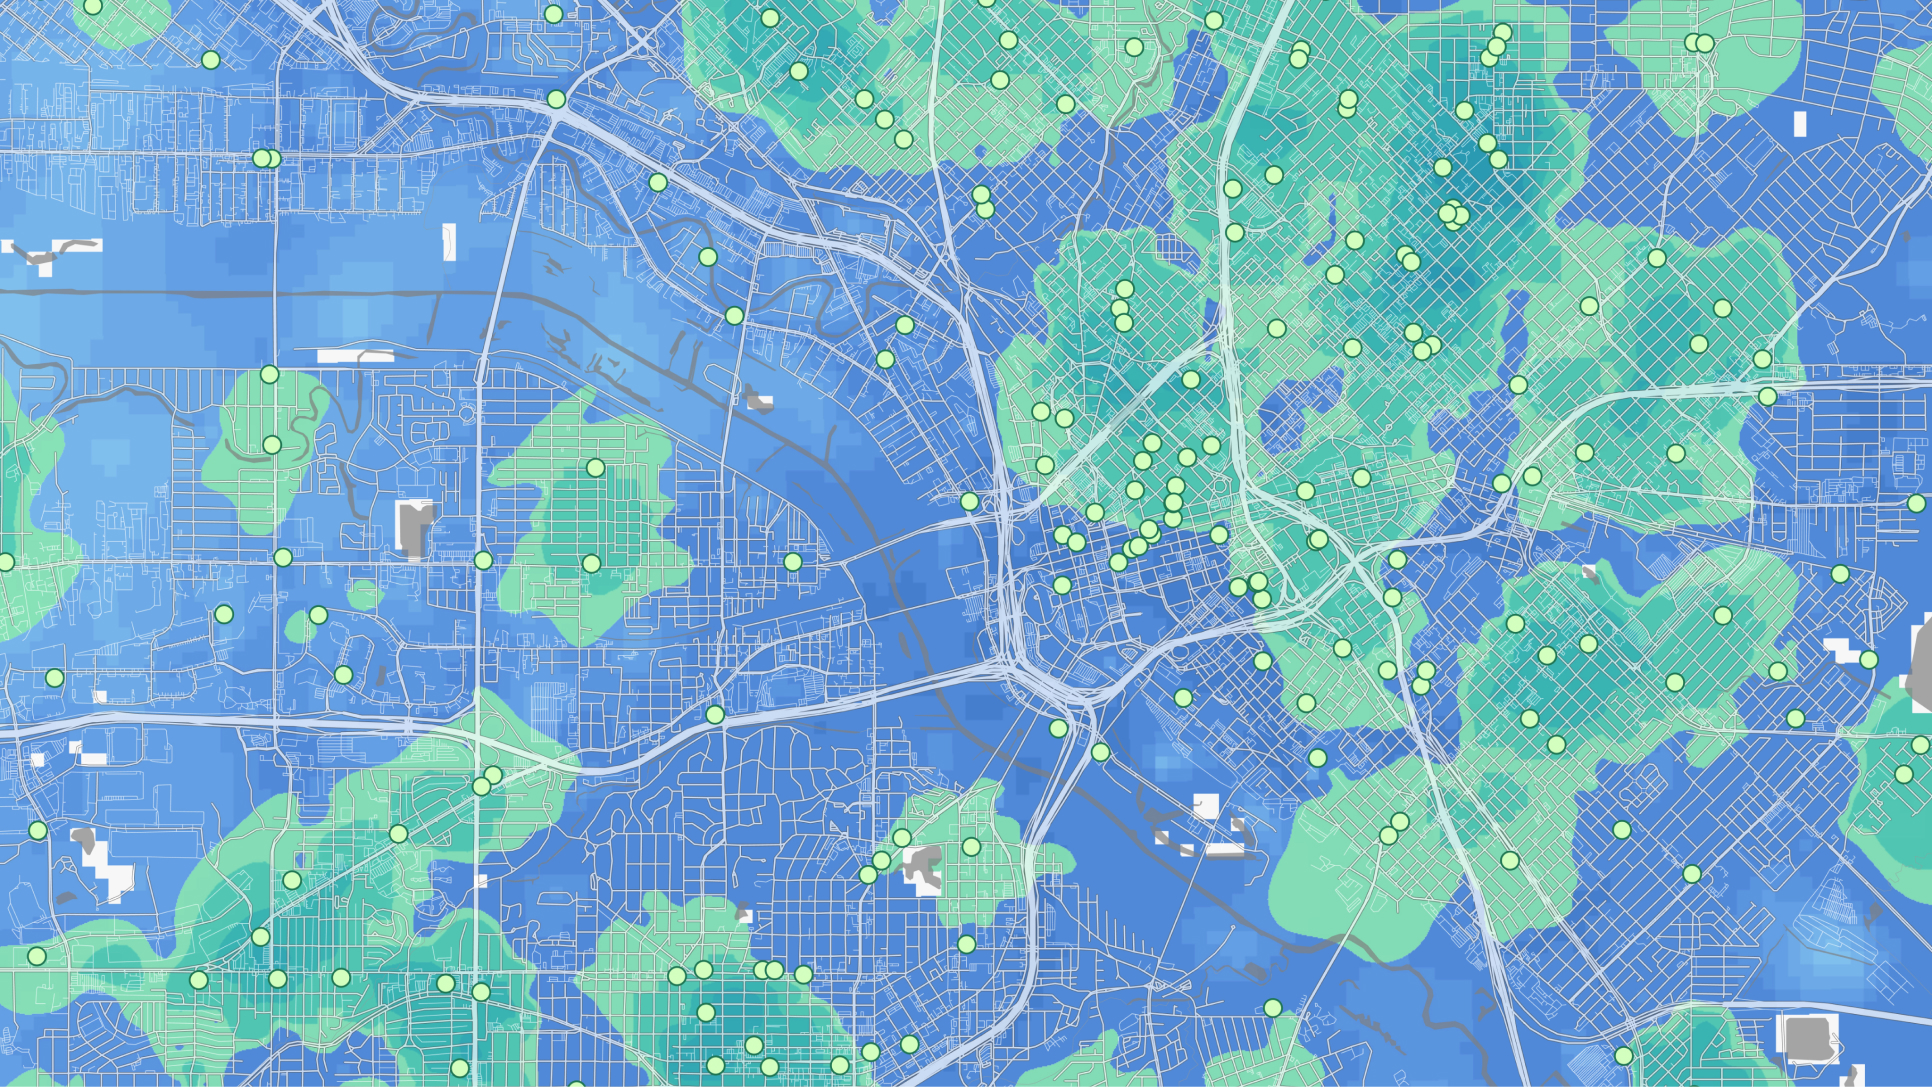 Blue map with green shaded areas indicating customer analytics